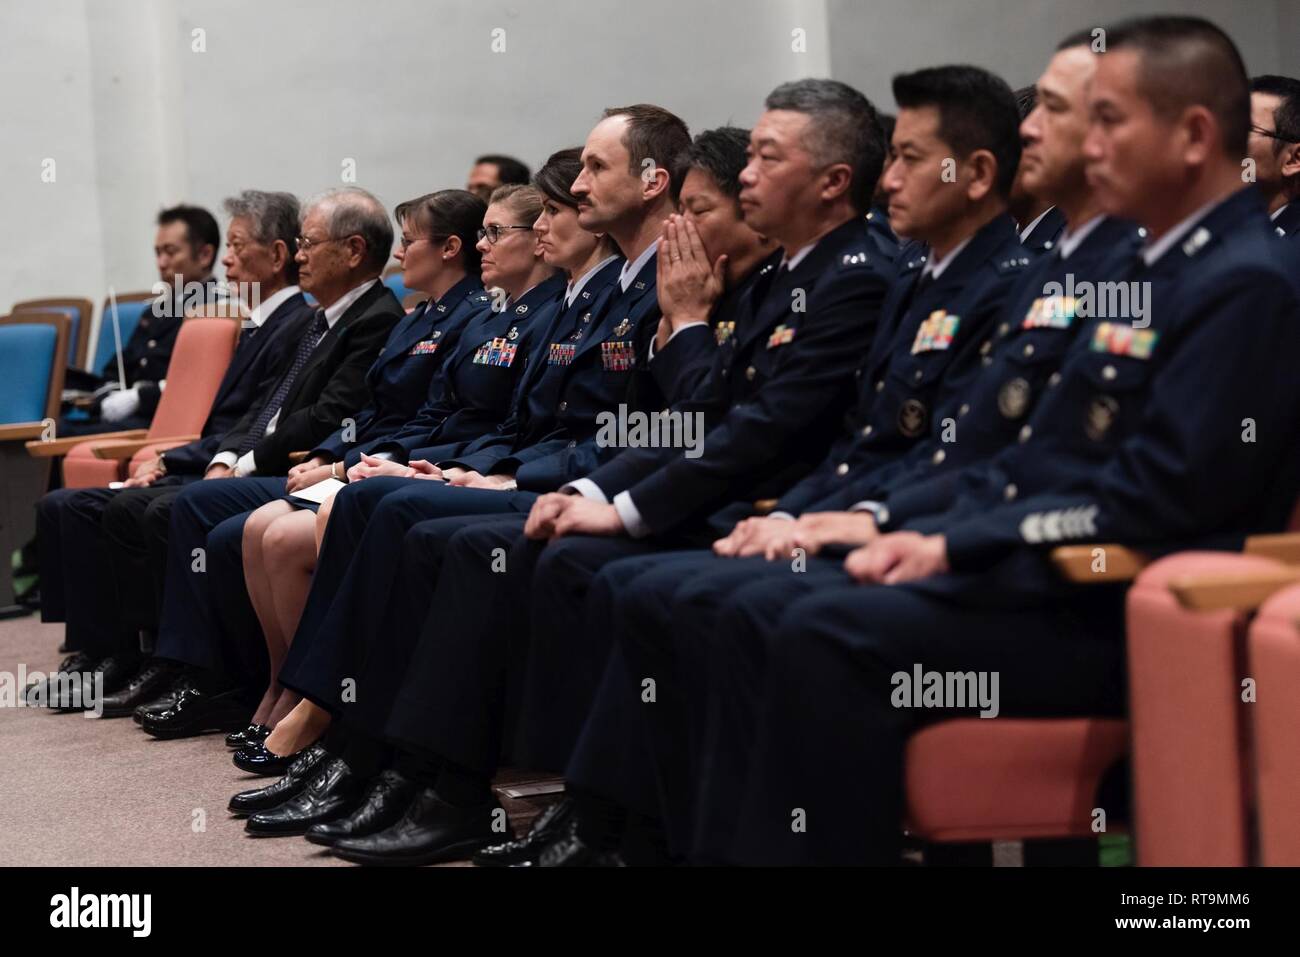 Airmen from the Japan Air Self-Defense Force’s Naha Air Base and U.S. Air Force’s 18th Wing sit side-by-side with Japan-America Air Force Goodwill Association members during the 2018 JAAGA Awards Ceremony January 31, 2019, at Naha Air Base, Japan. JAAGA promotes friendly and cooperative relationships between the JASDF and U.S. Air Force. Stock Photo